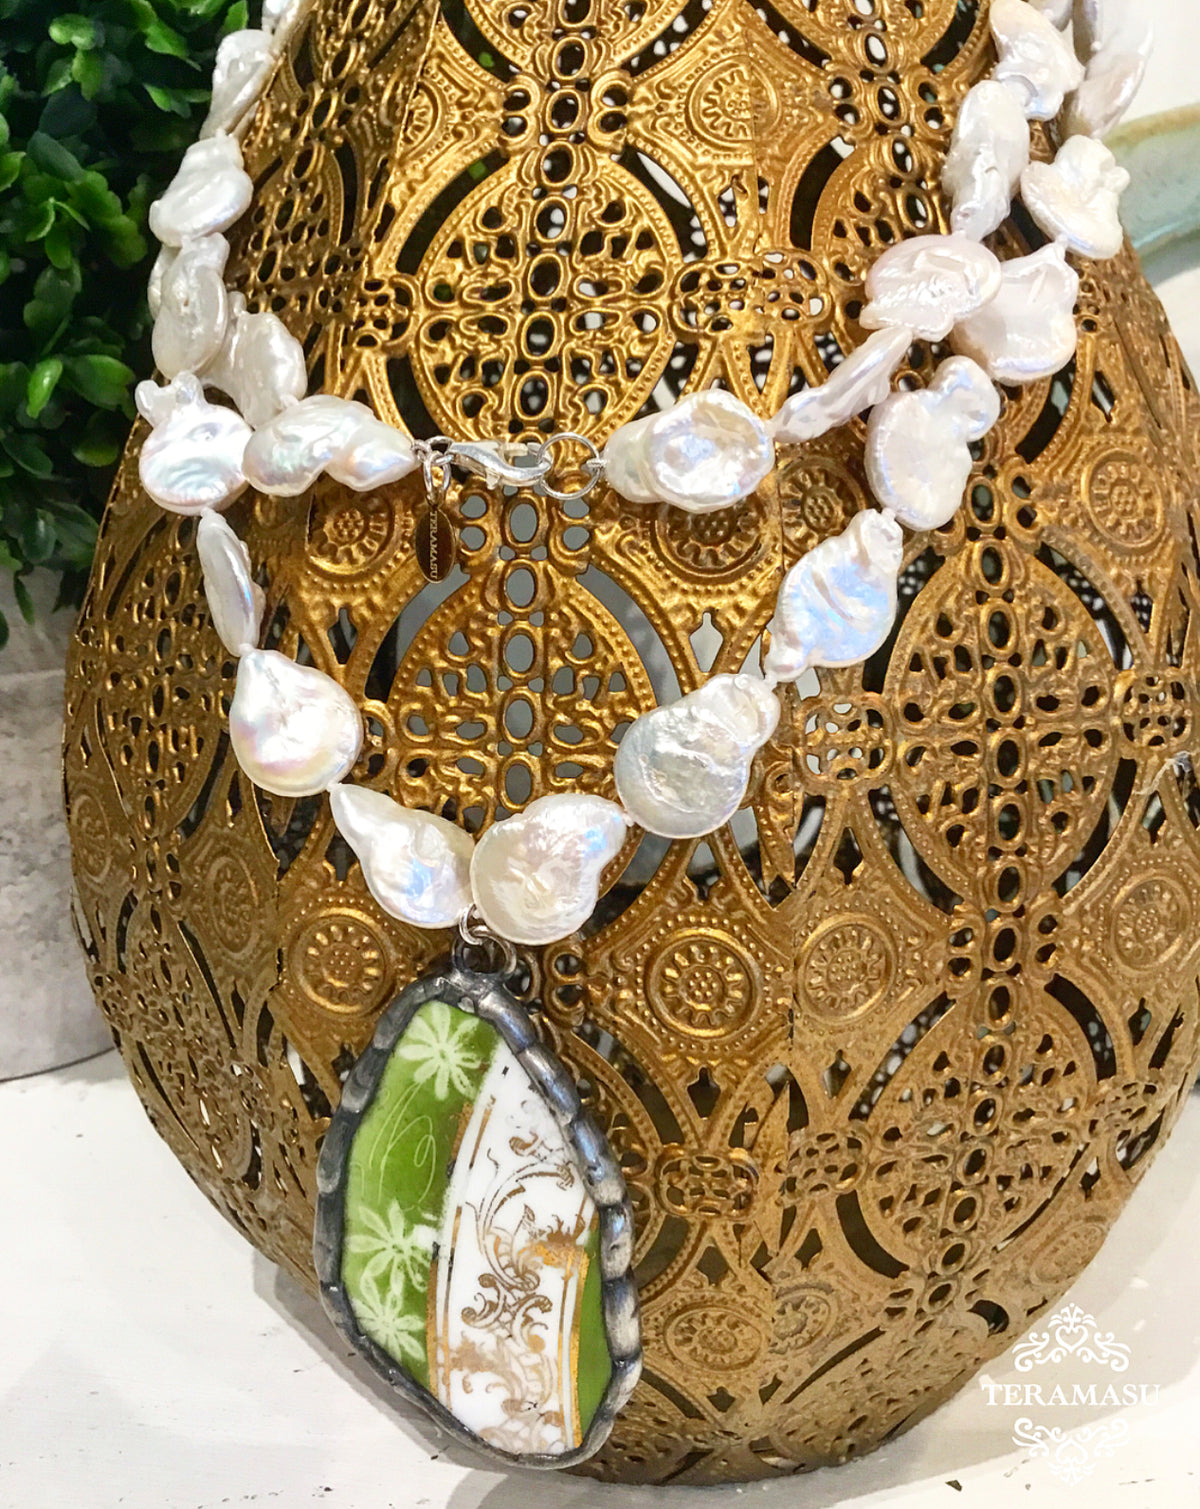 Friday Favorite: Gorgeous & New Teramasu Pearl Necklace with Green, White, & Gold Pottery Pendant